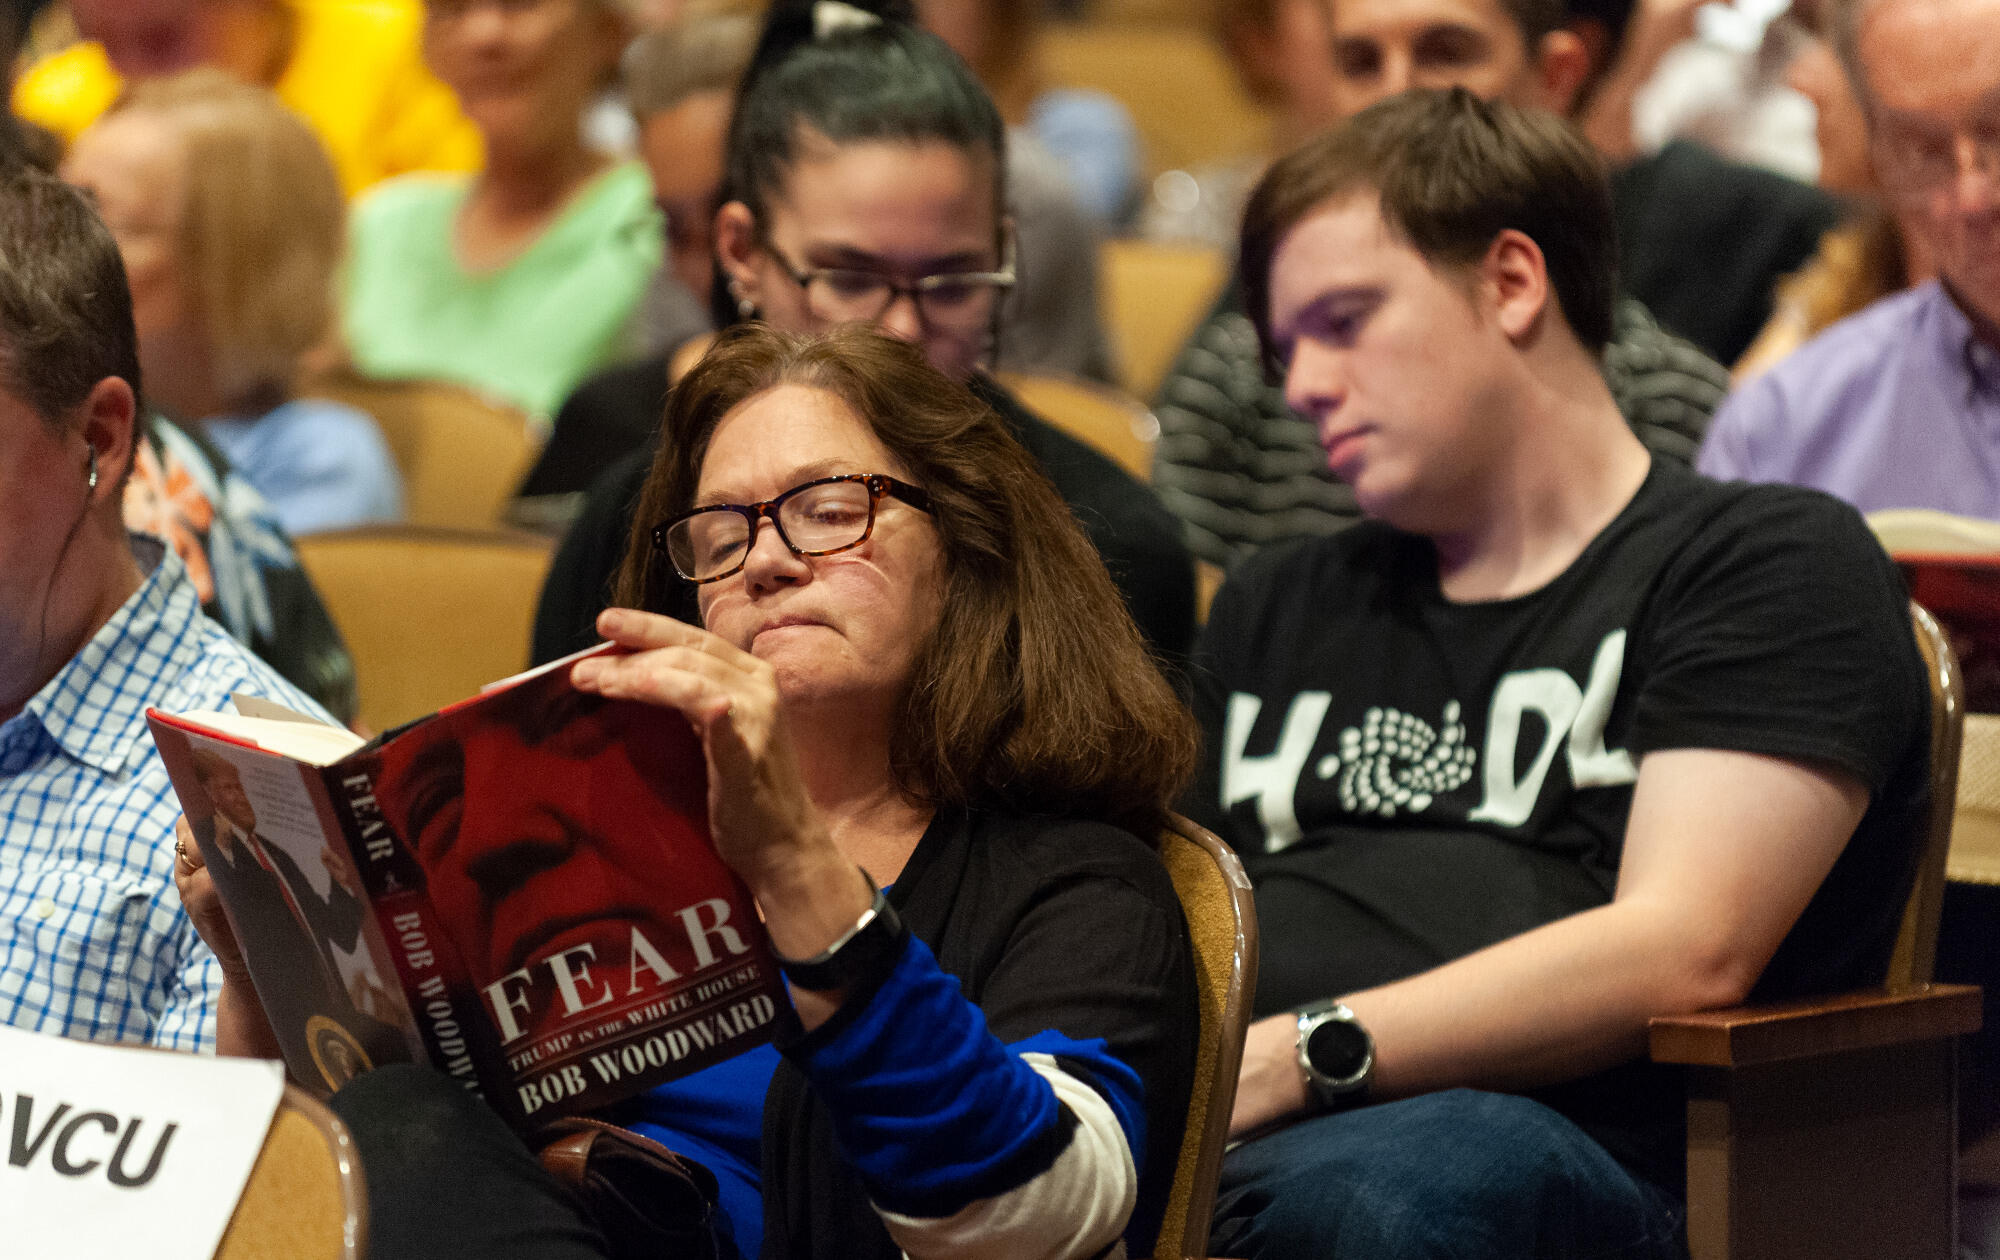 An audience member reads from Bob Woodward's "Fear: Trump in the White House." (Photo by Kevin Morley, University Relations)